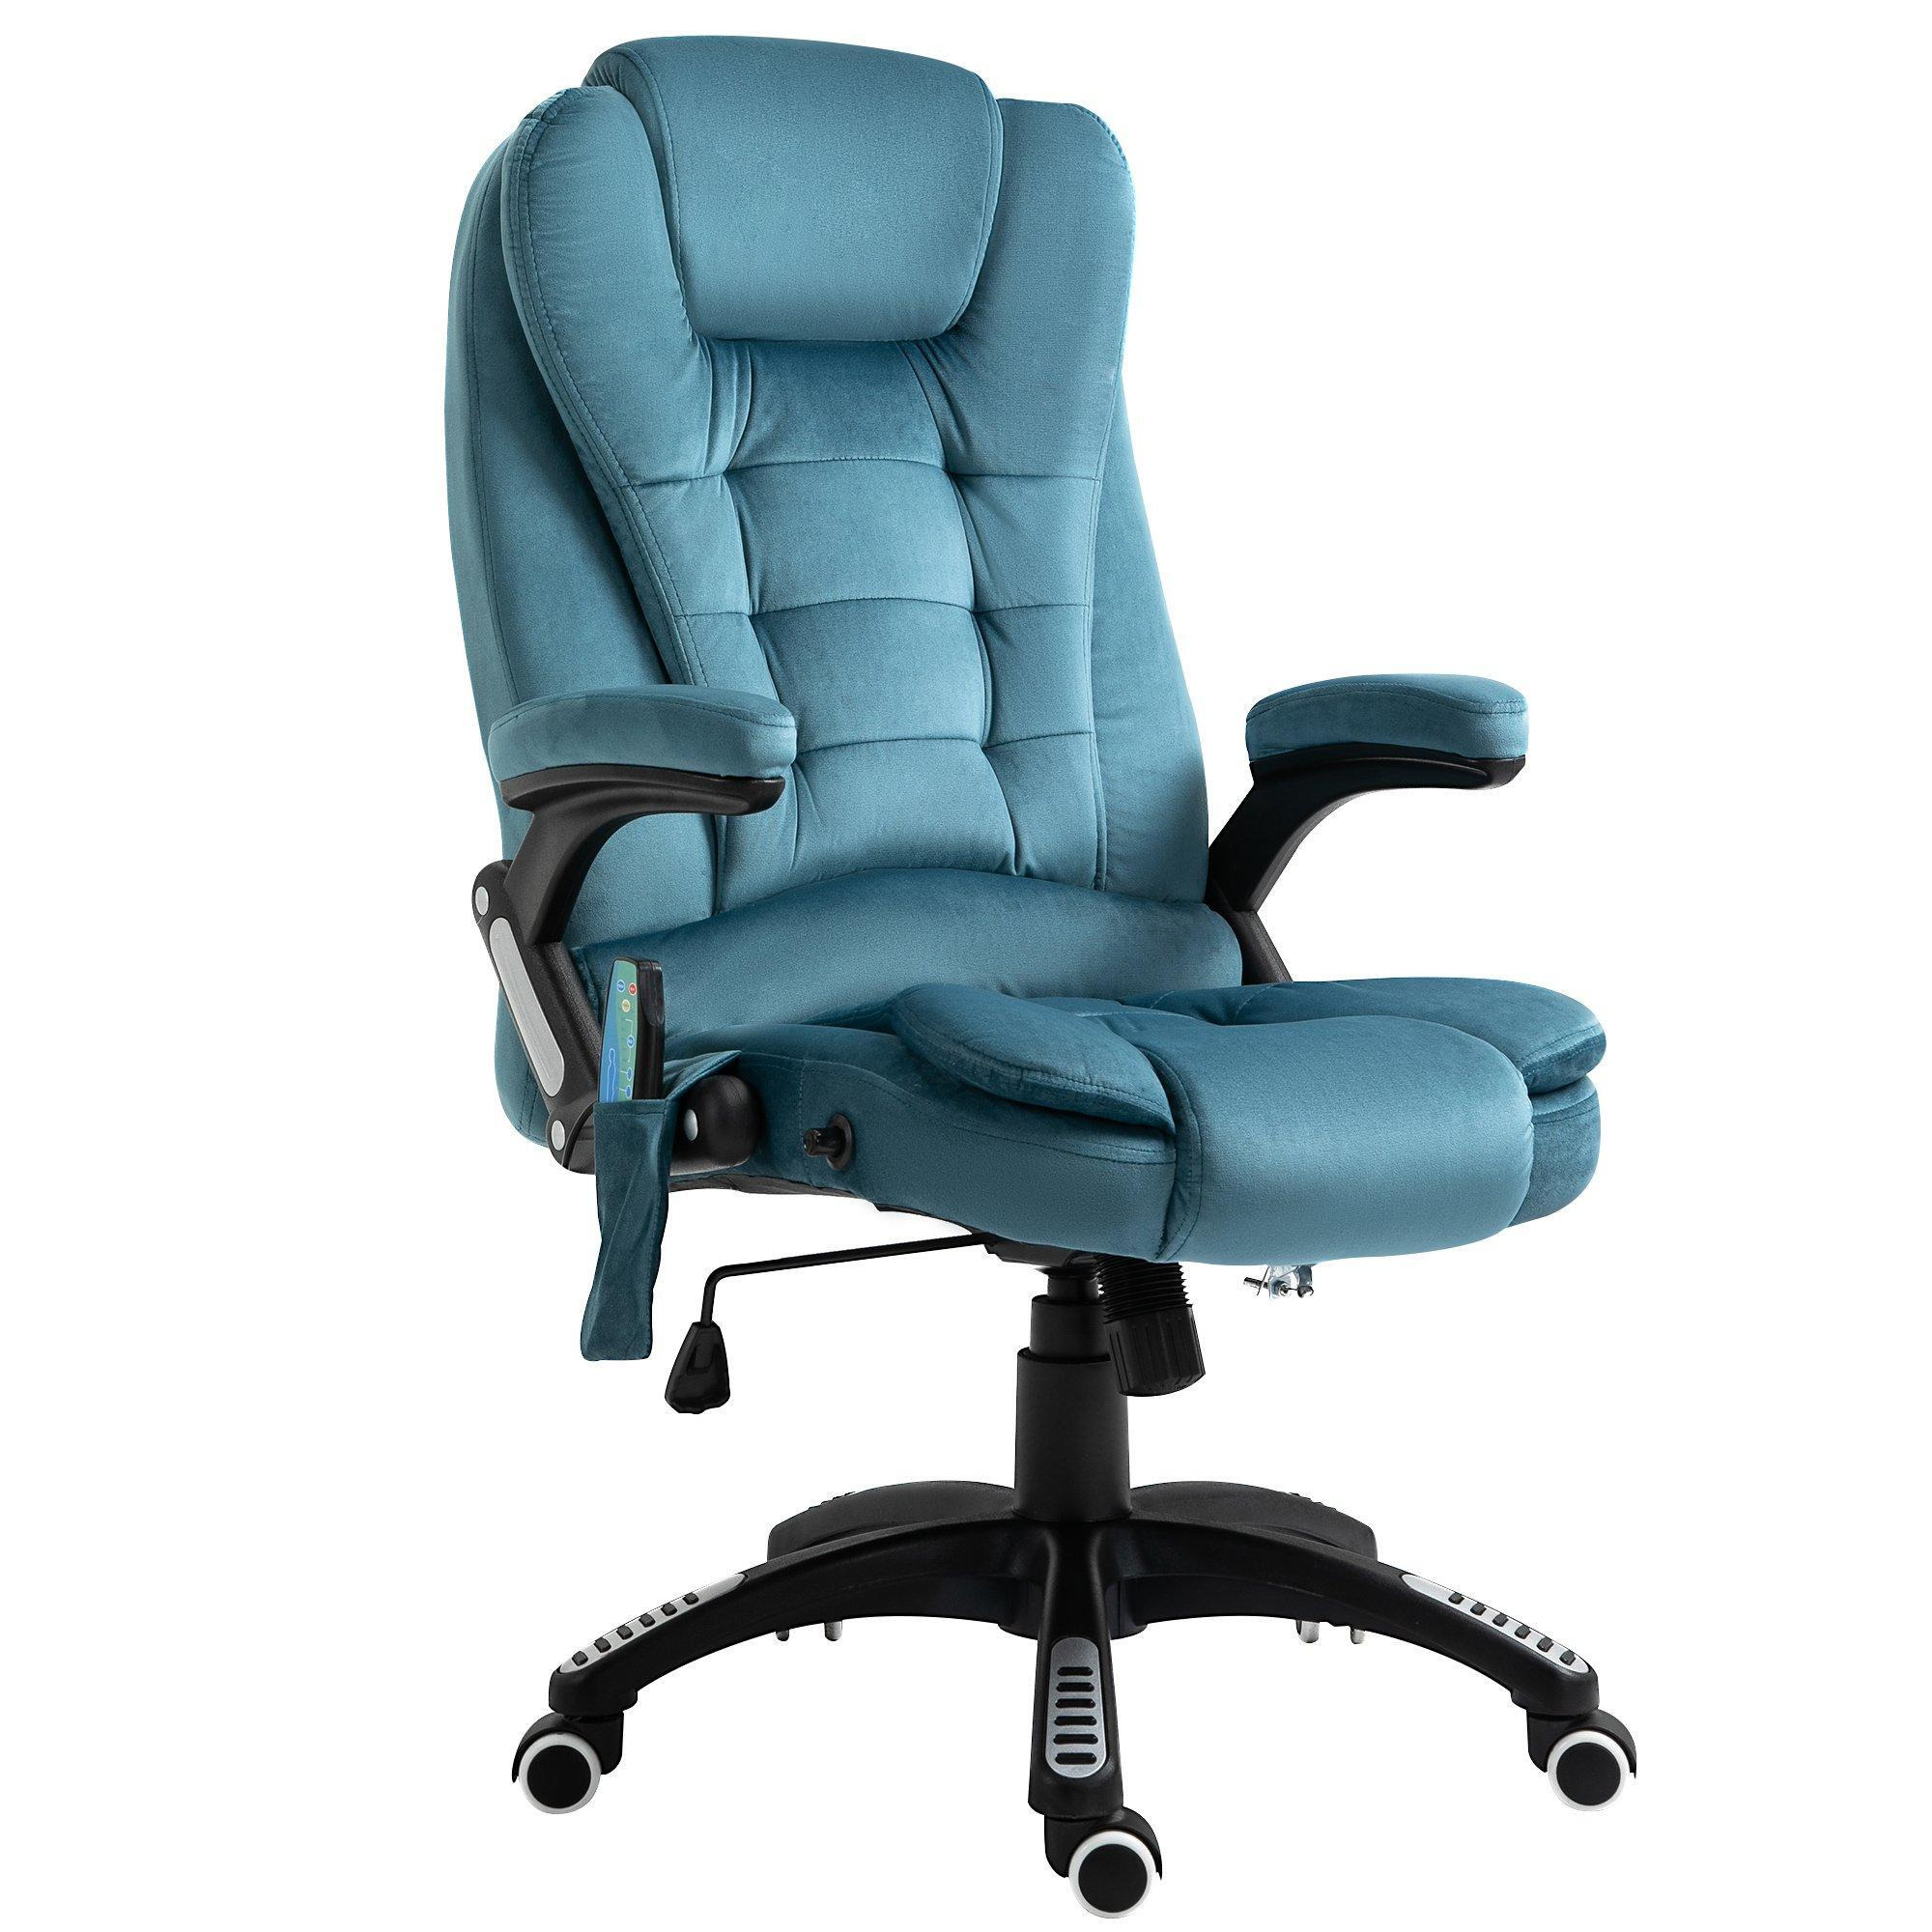 Executive Reclining Chair with Heating Massage Points Relaxing - image 1